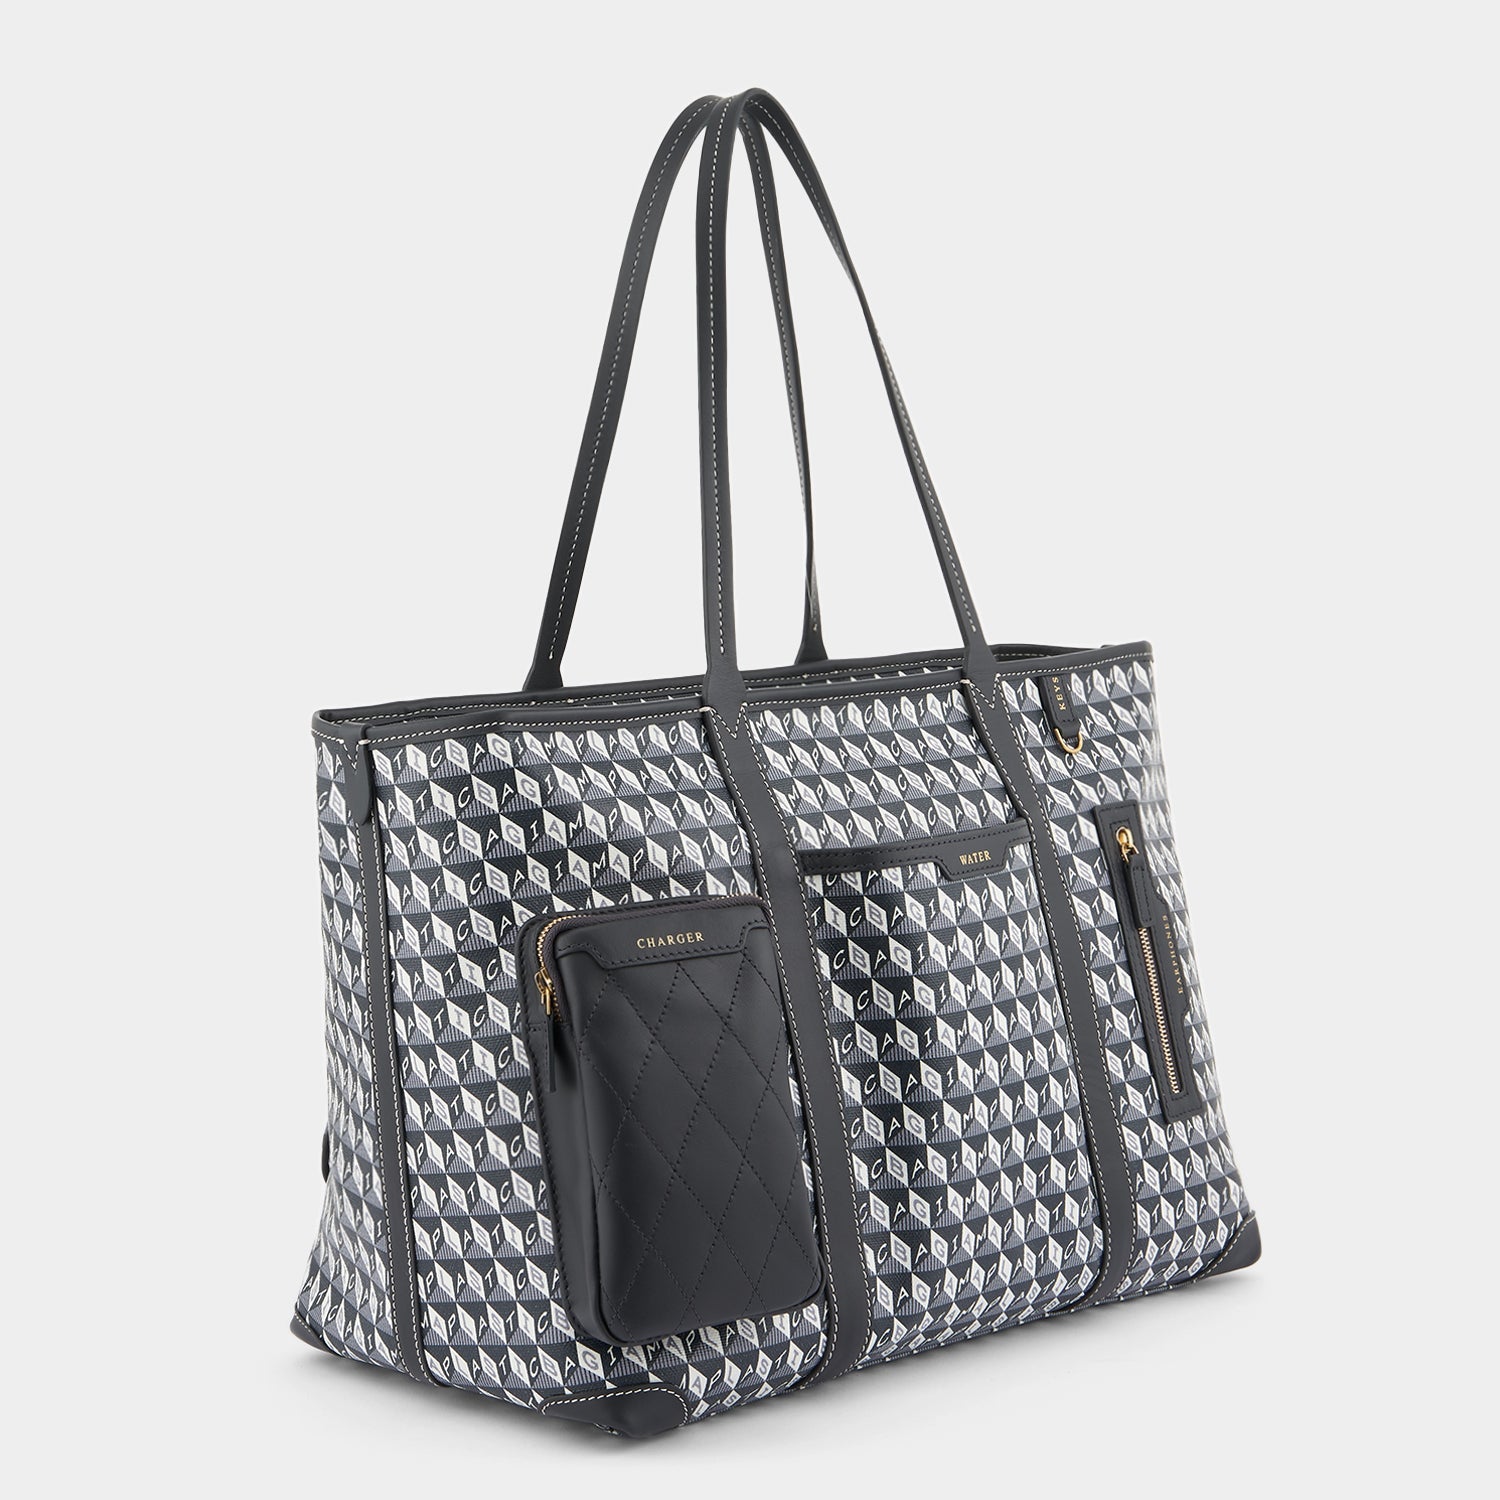 I am a Plastic Bag In-Flight Tote -

                  
                    Recycled Canvas in Charcoal -
                  

                  Anya Hindmarch EU
